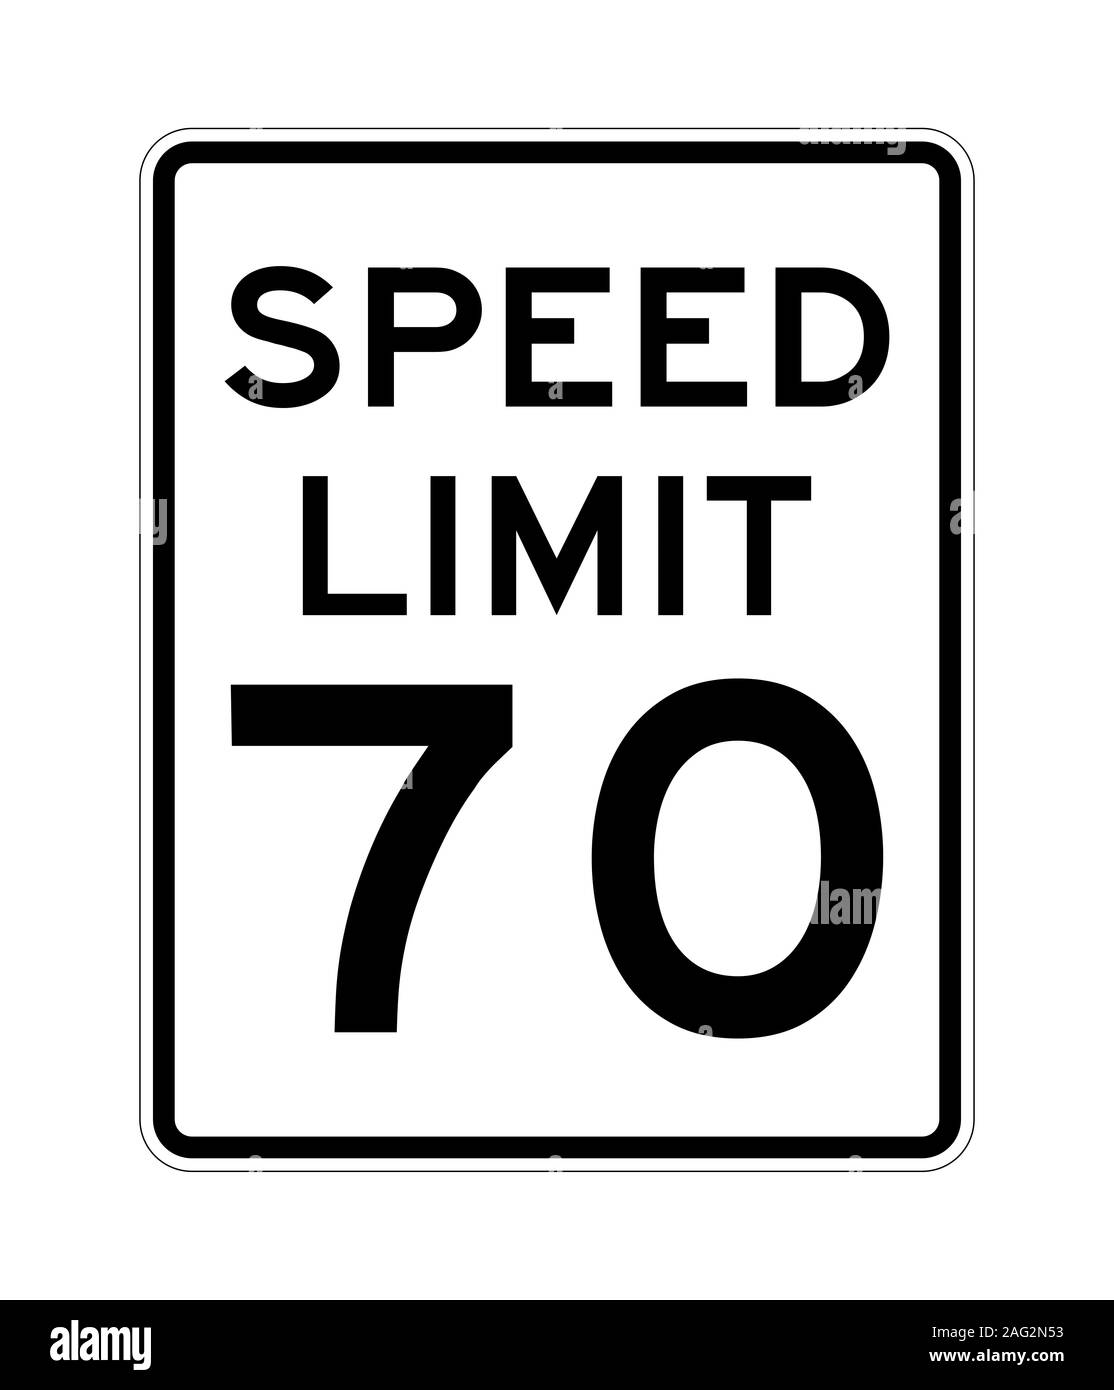 70 MPH SPEED LIMIT IN FORCE SAFETY STICKER RIGID TR057 INDOOR OUTDOOR SIGN 